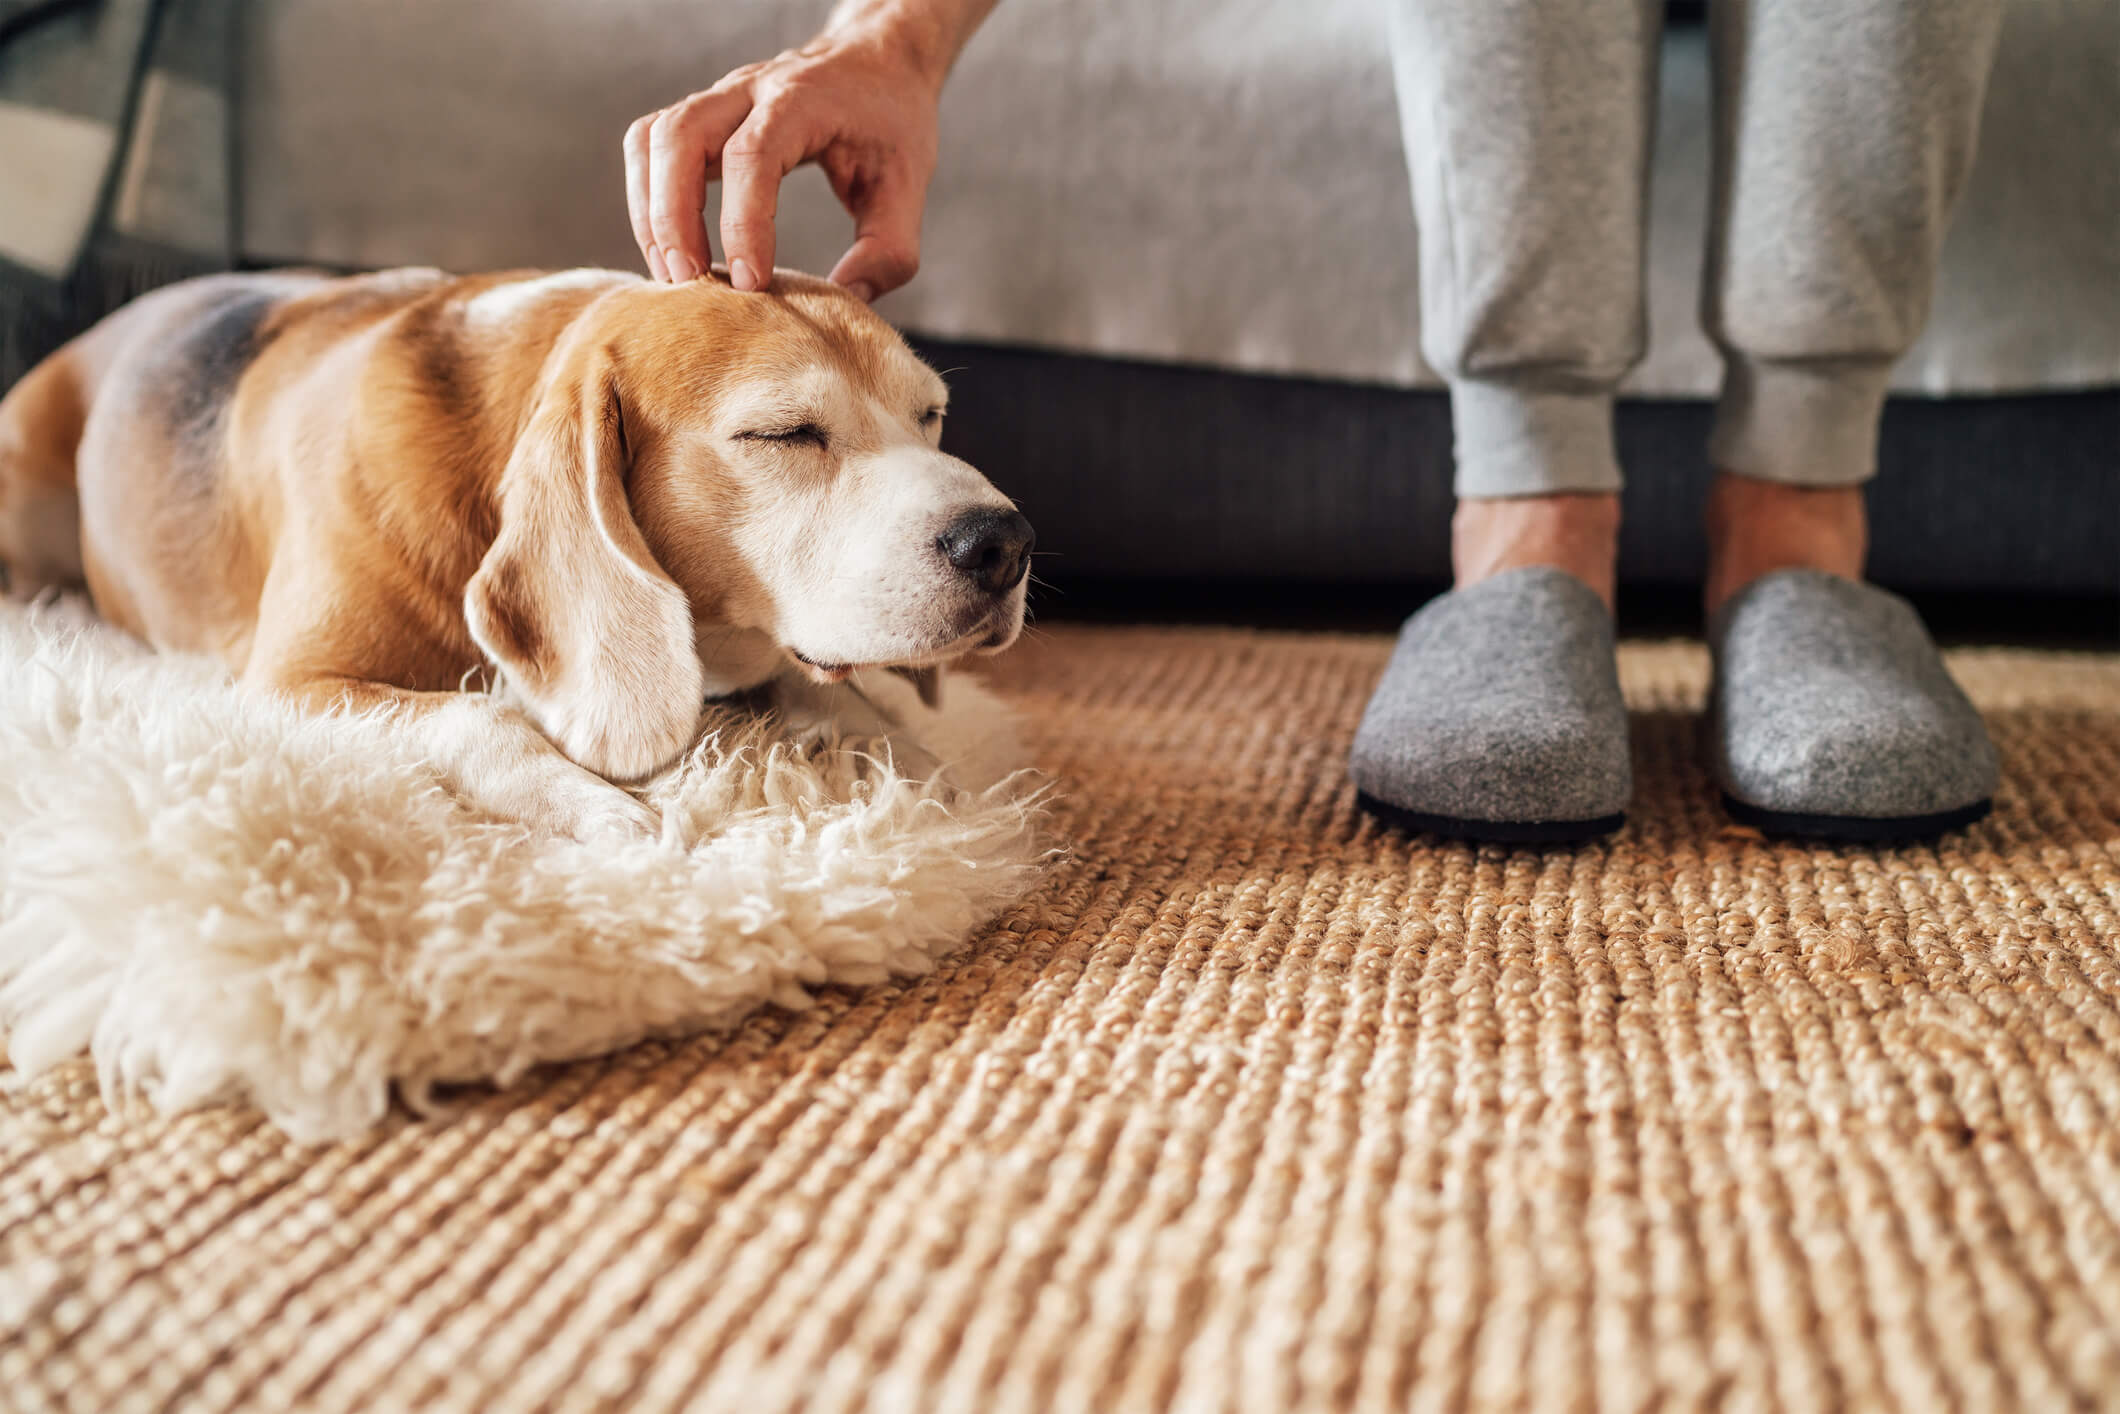 person petting dog lying on a fluffy rug on a carpeted floor